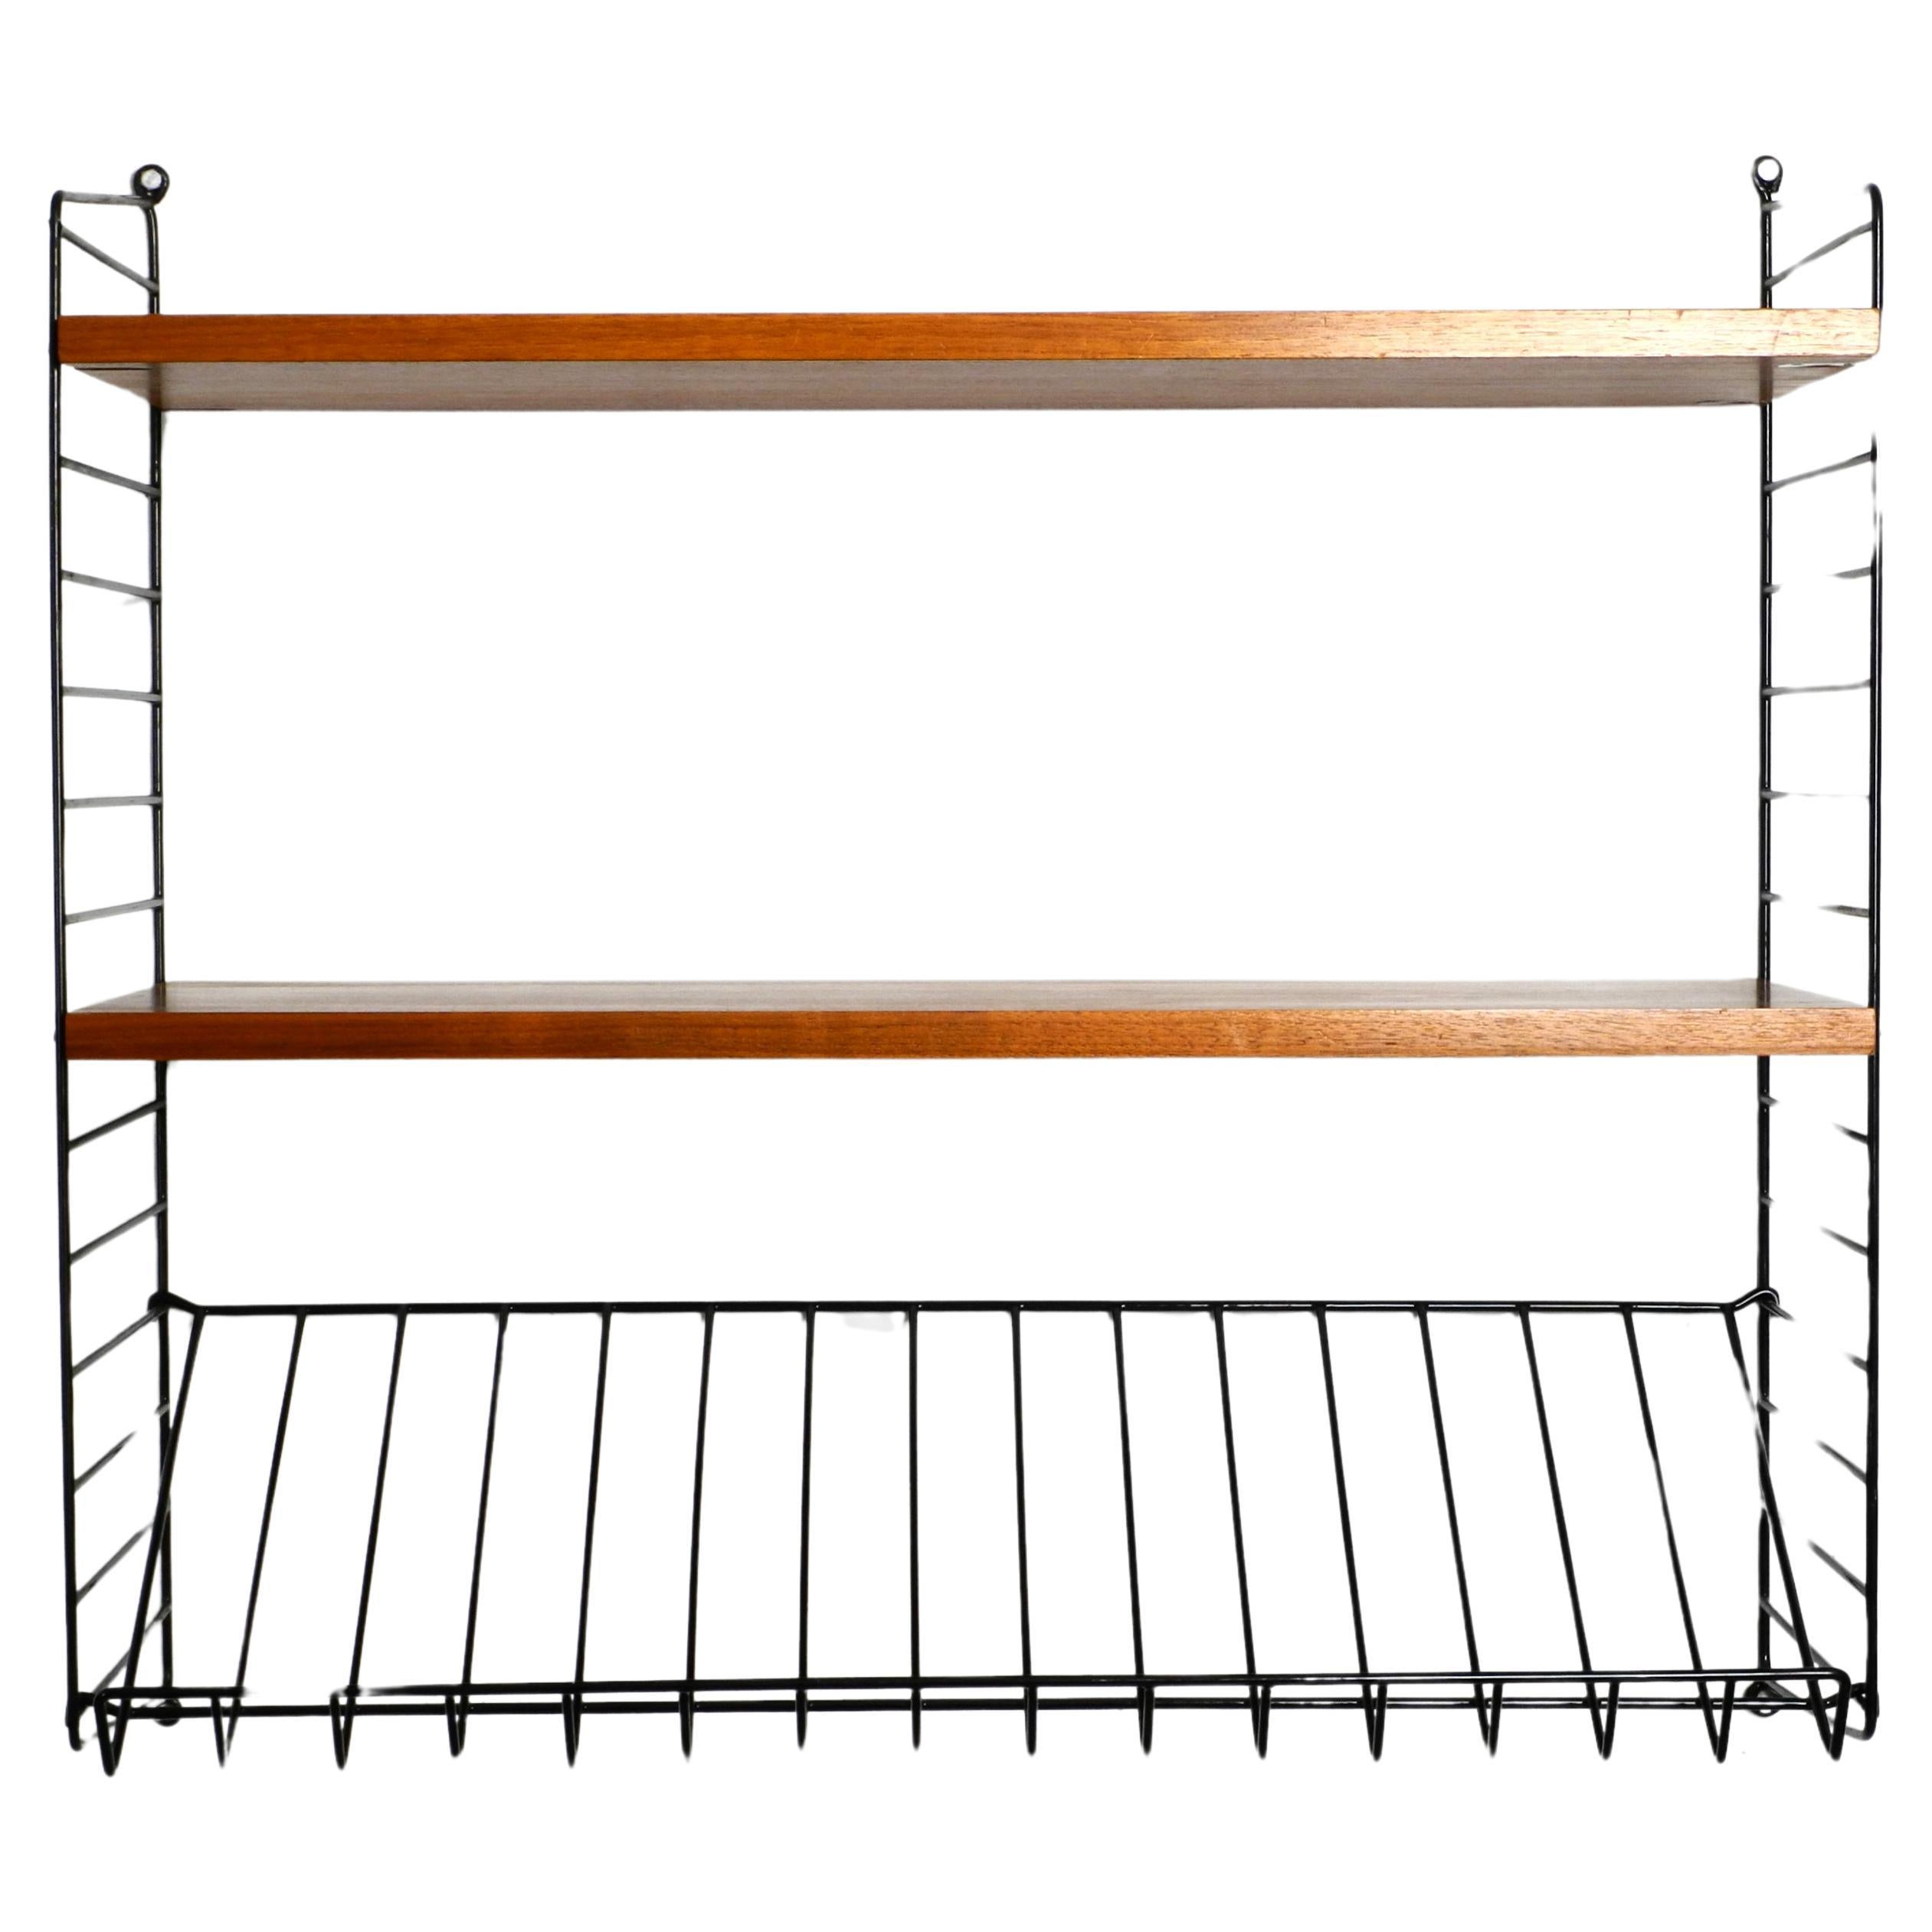 1960s Nisse Strinning teak string shelf with one magazine rack and two shelves